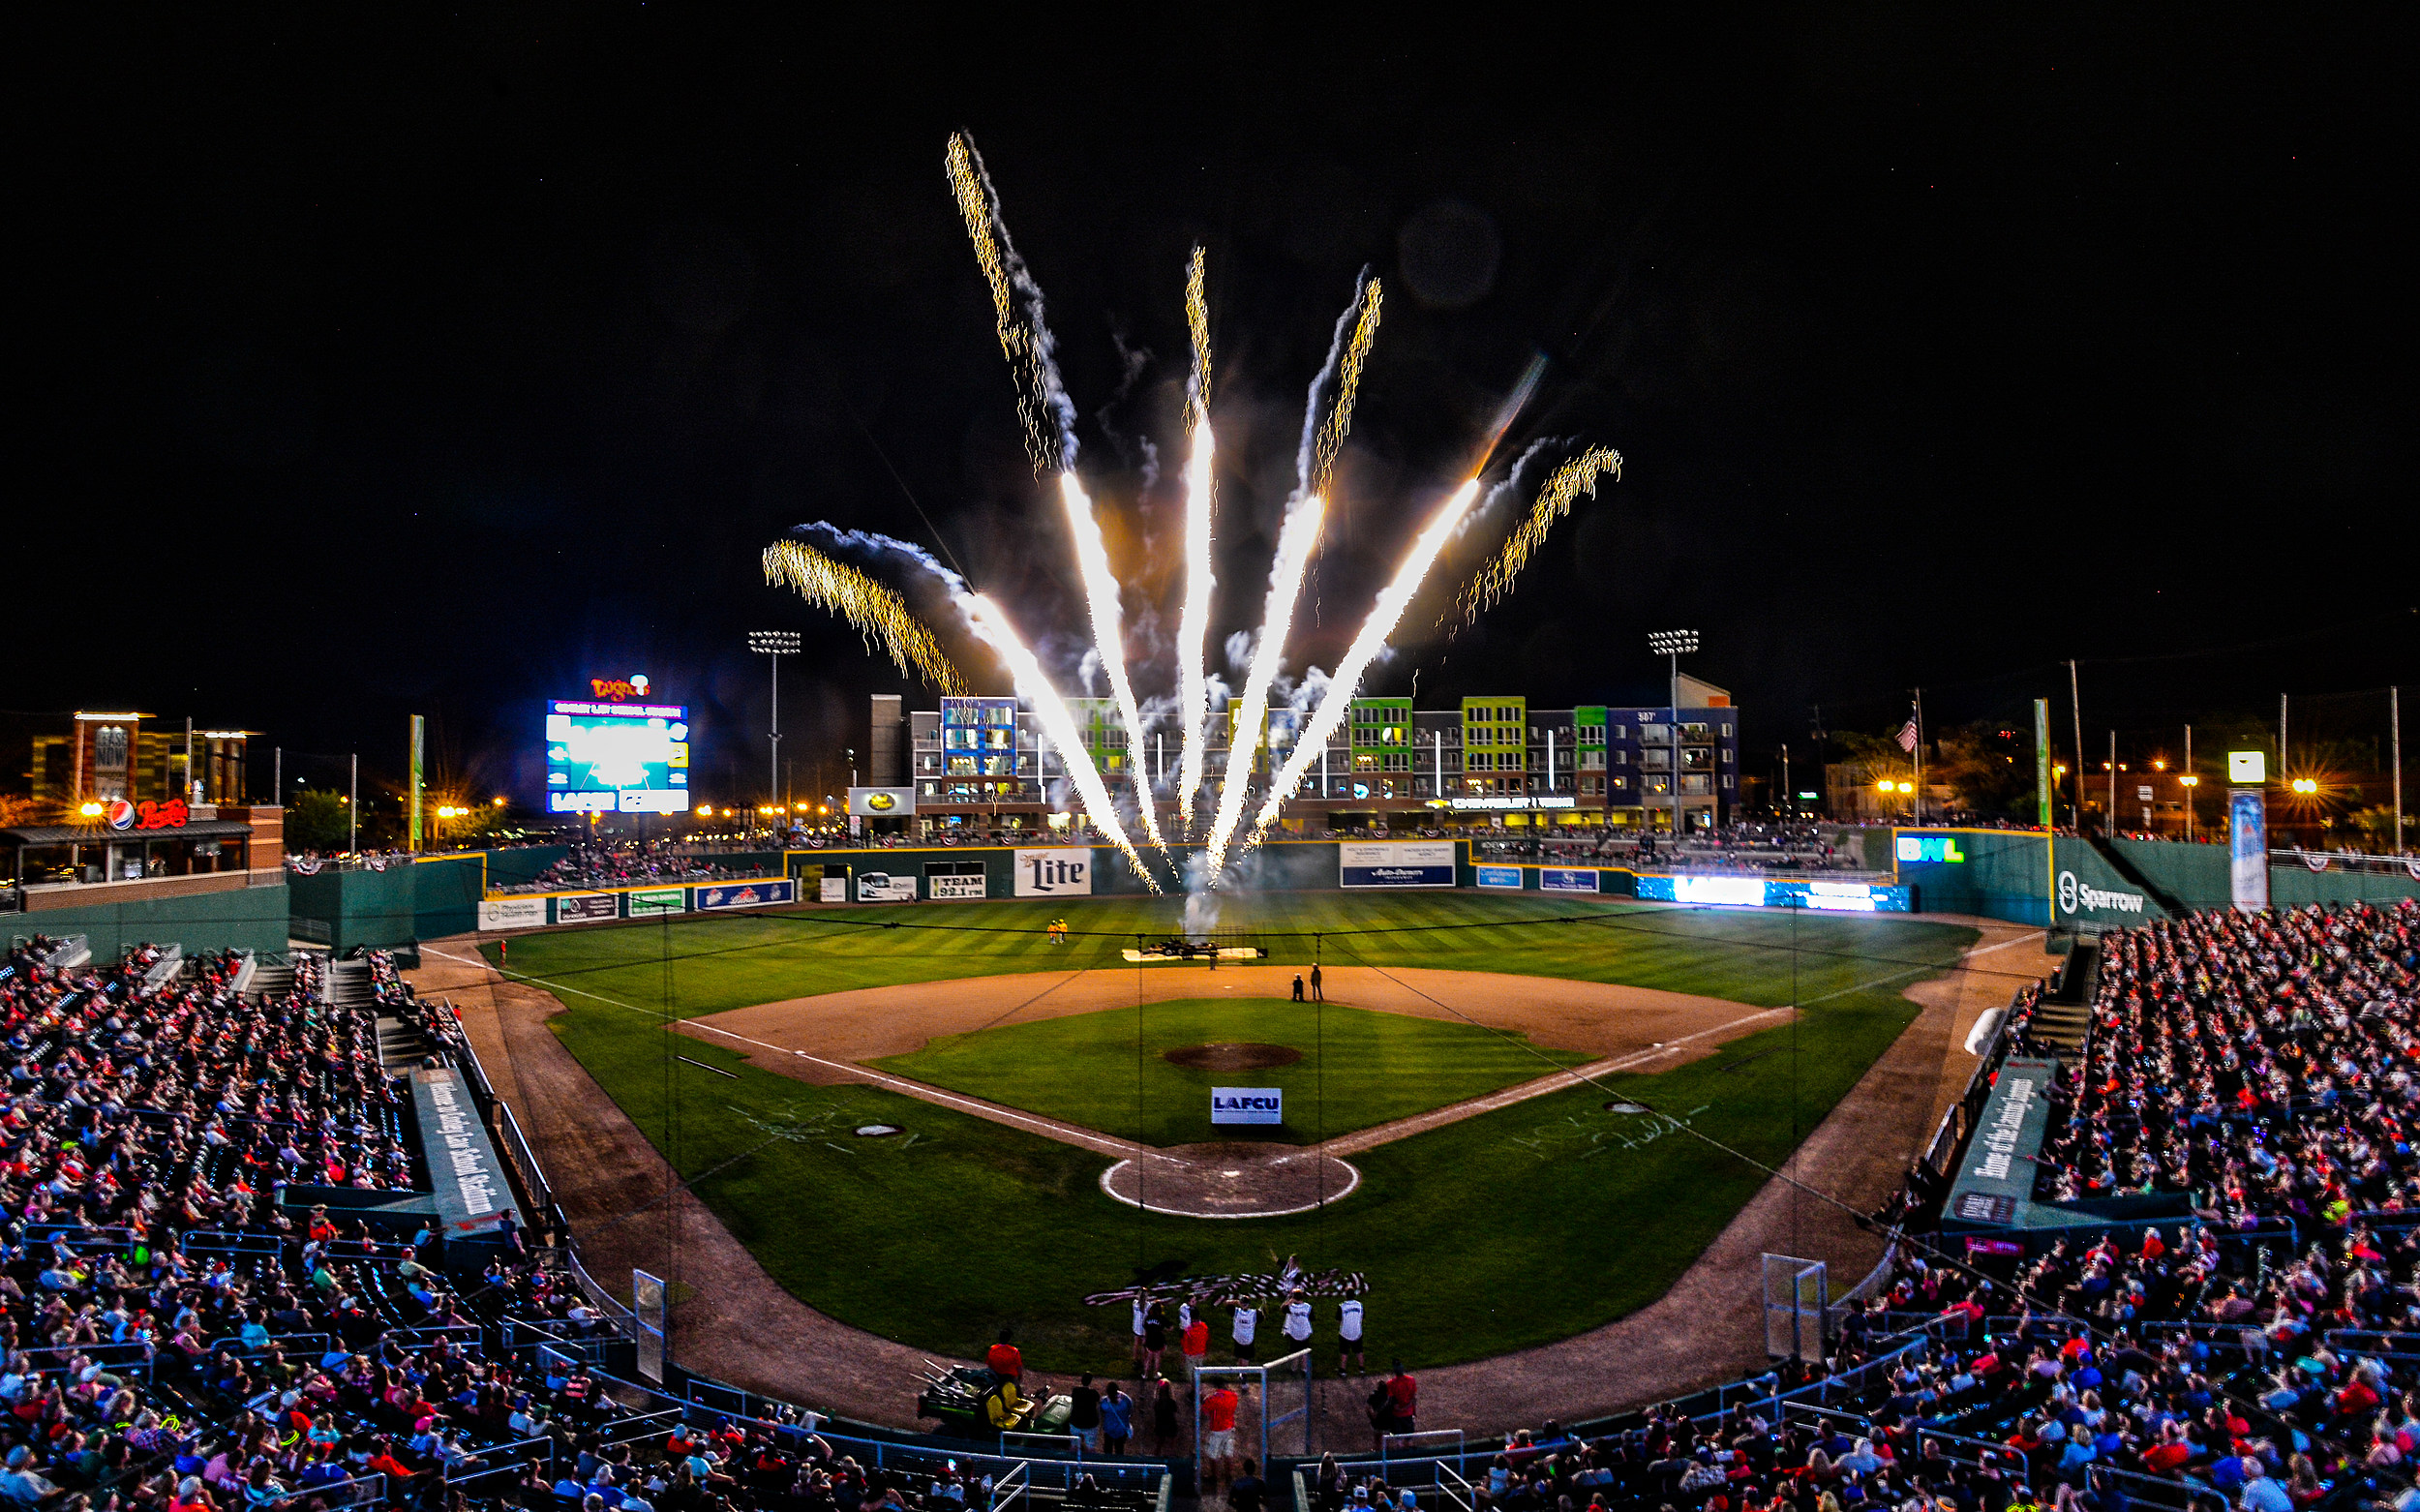 Lansing Lugnuts prepare for new season and a lot of changes in minor league  ball